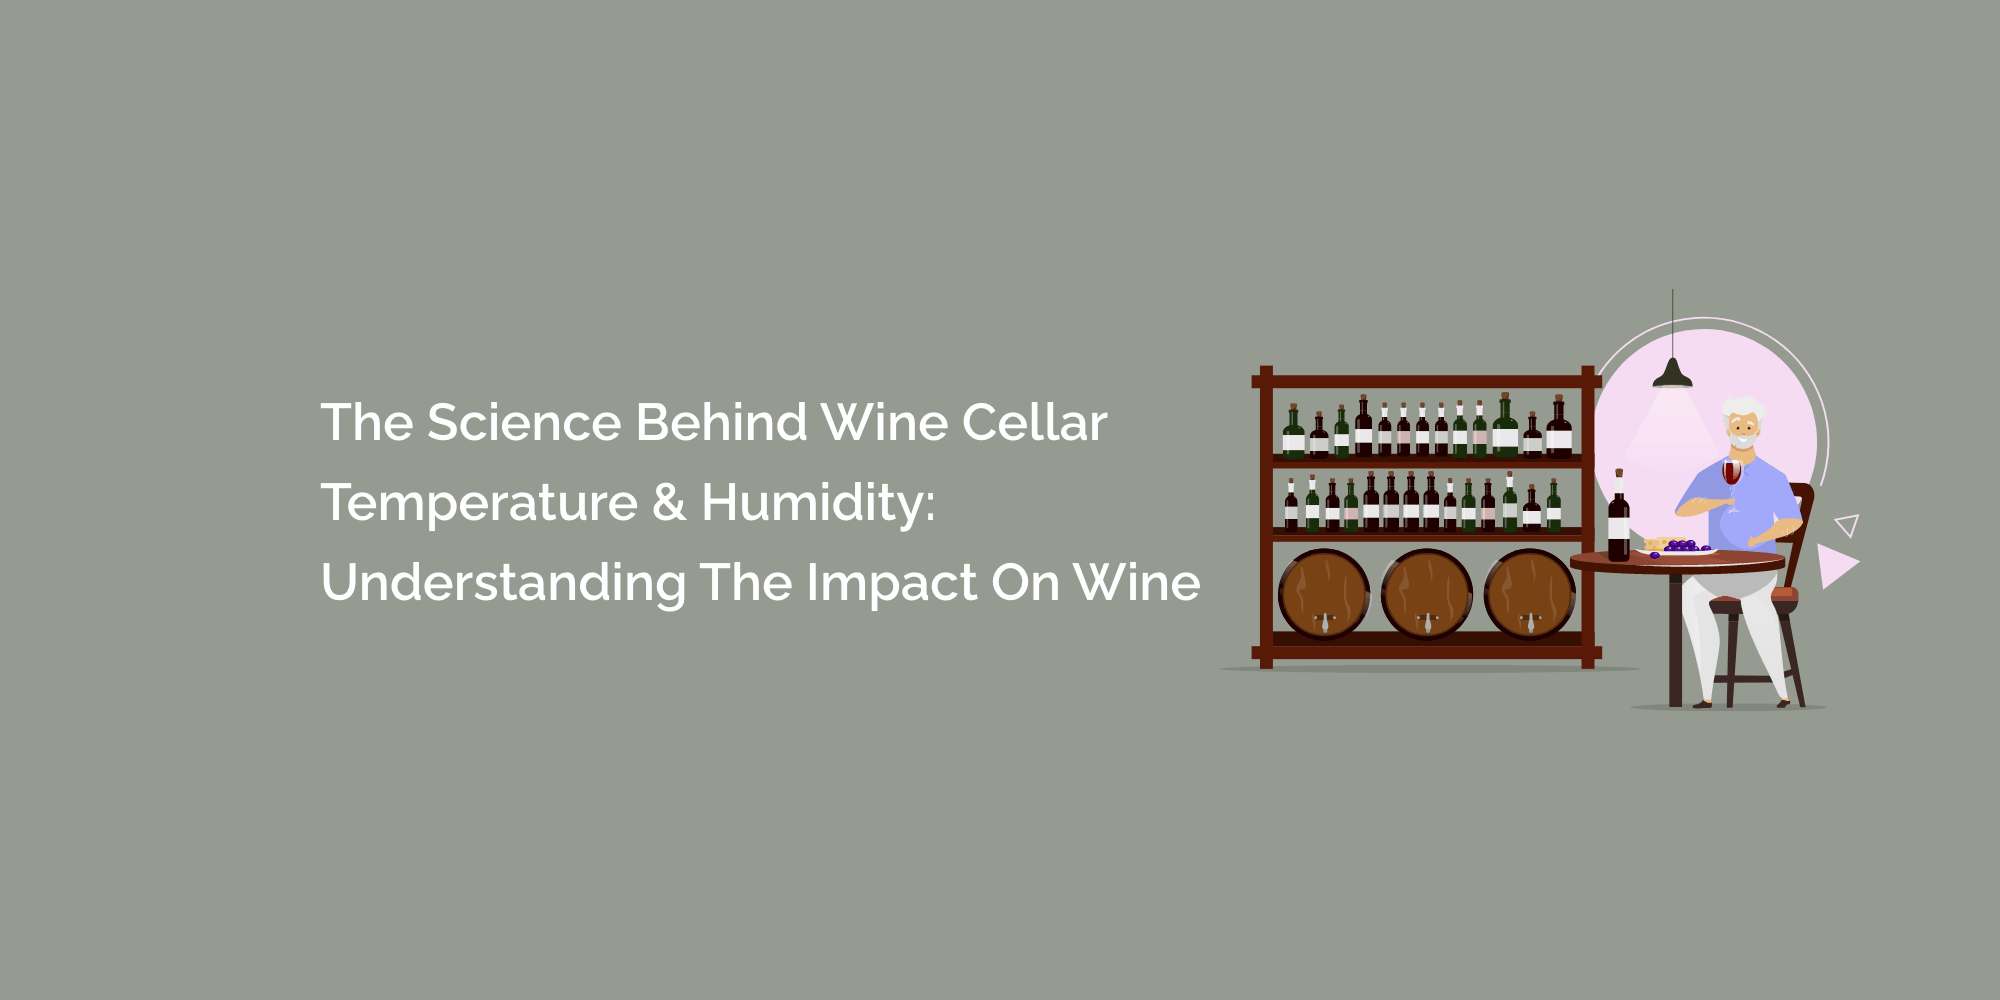 The Science Behind Wine Cellar Temperature & Humidity: Understanding the Impact on Wine